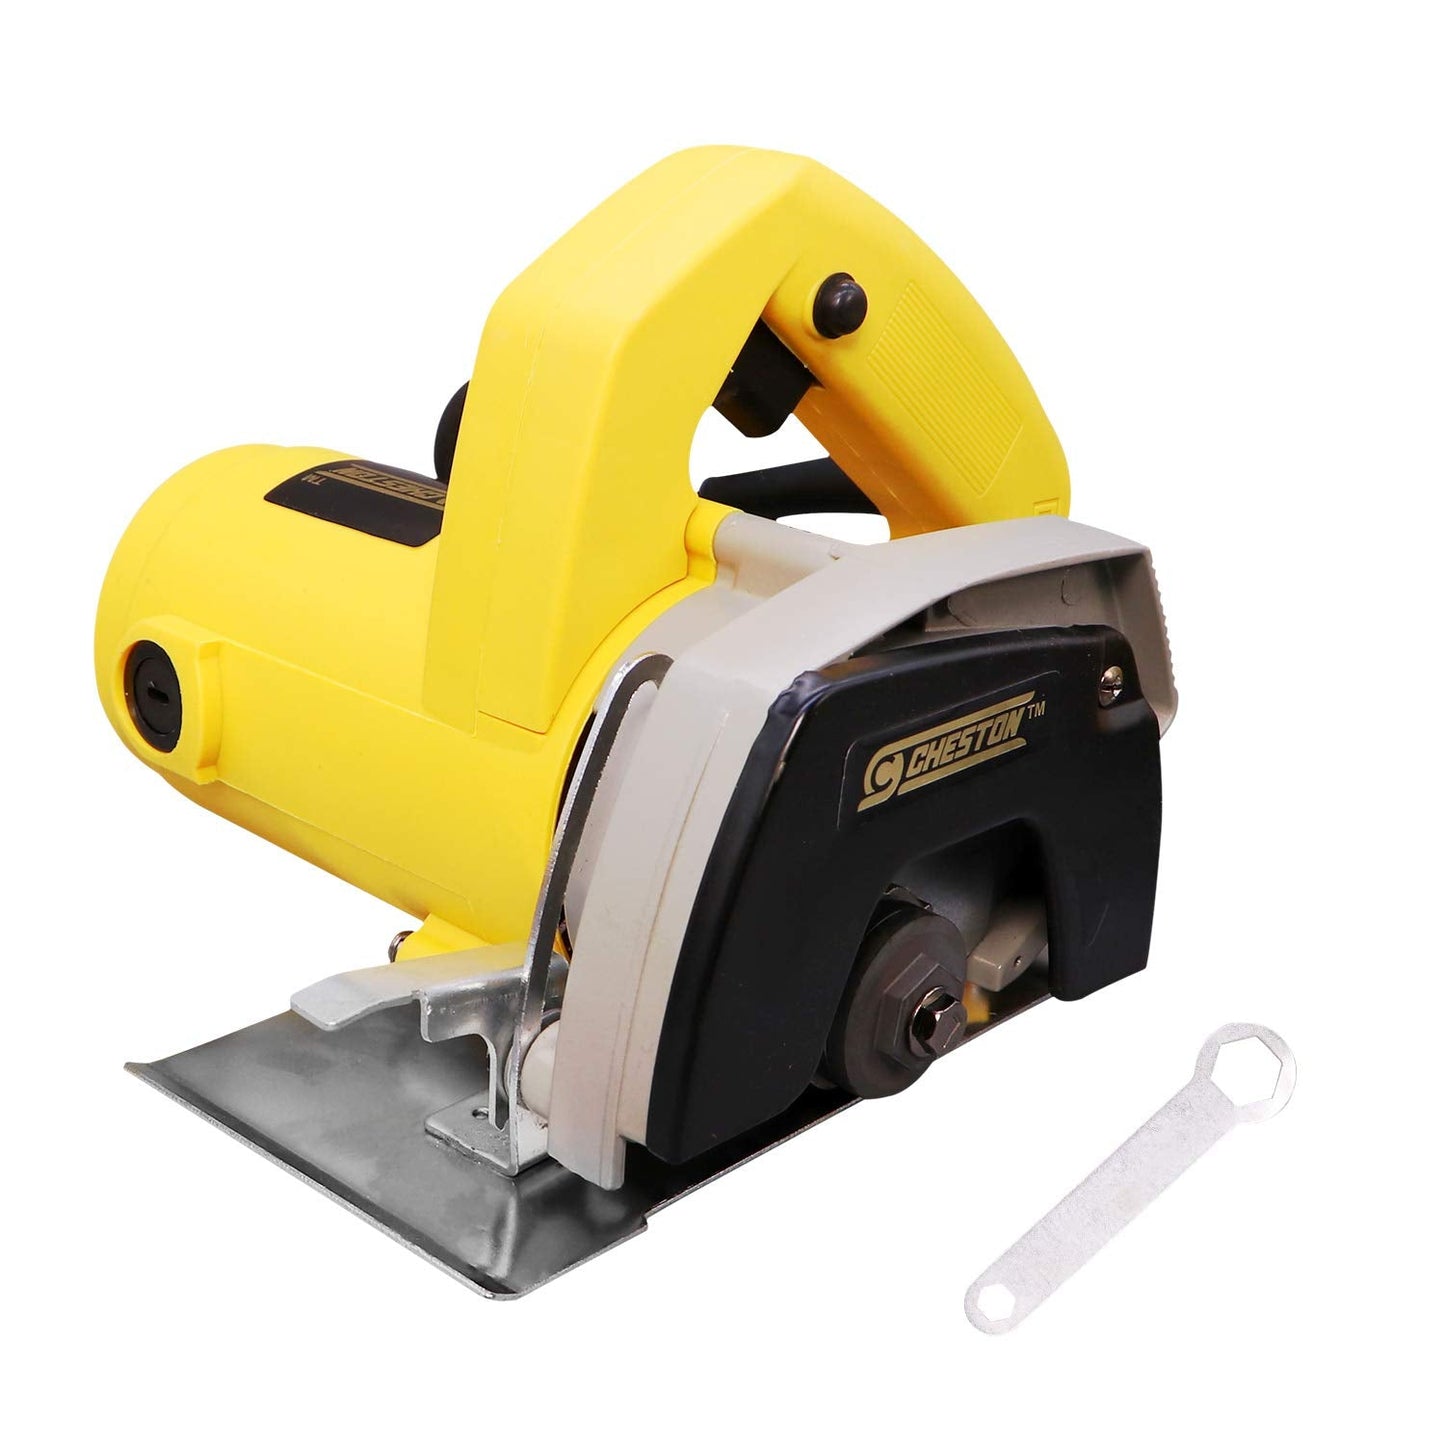 Cheston Marble Tile Stone Cutter Machine Capacity 110MM 1050 W 12000 RPMYellow